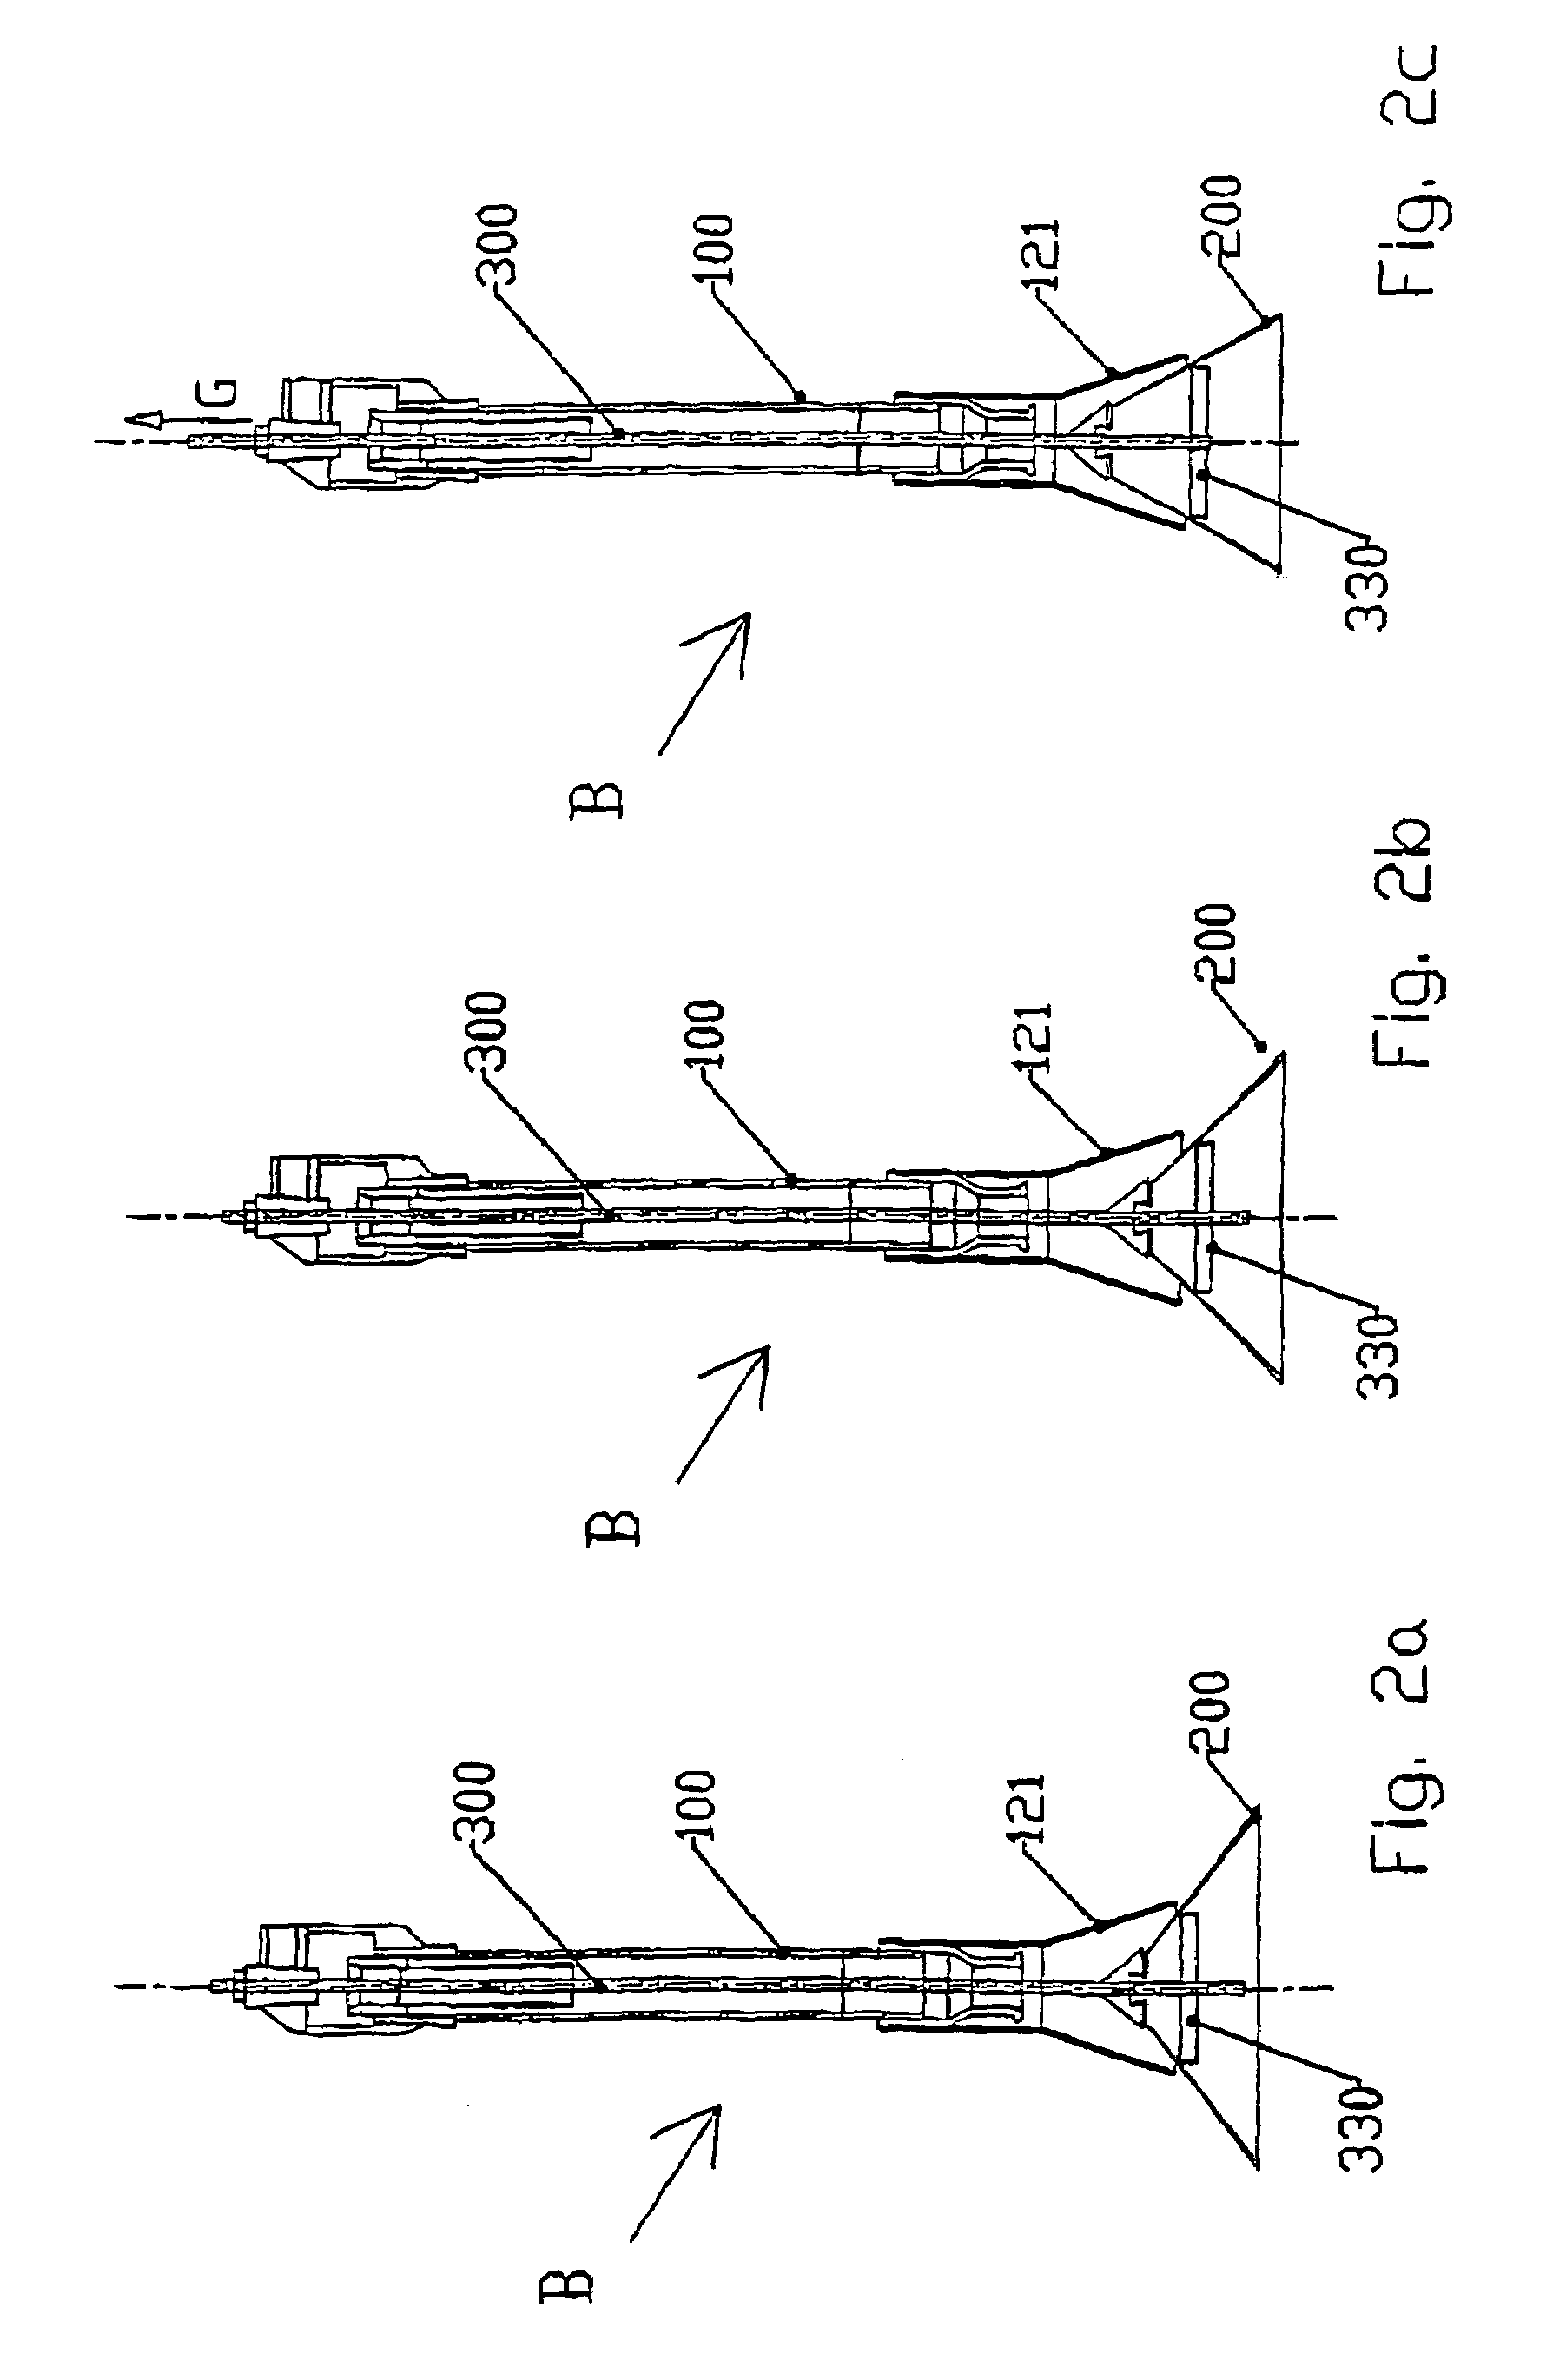 Gas burner-type combustion device and method for operating same